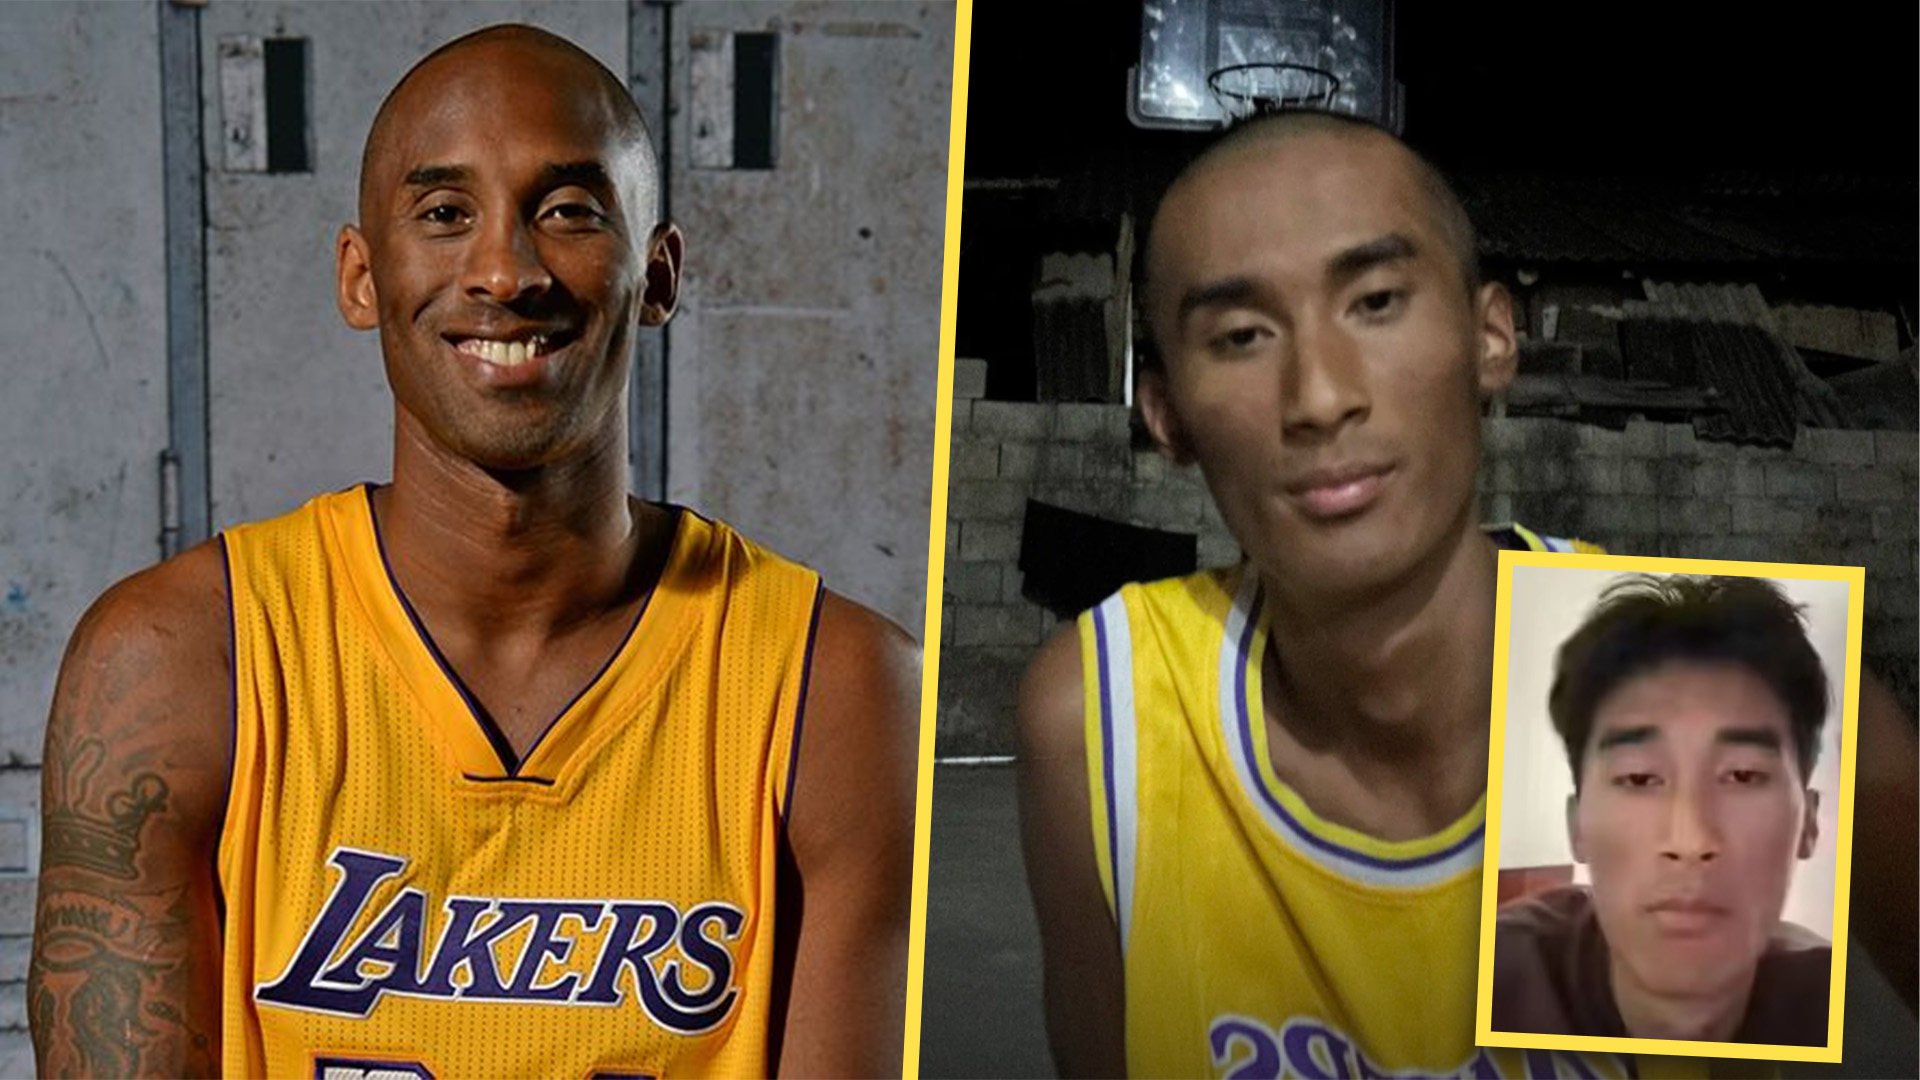 A young man in China who resembles the late basketball icon Kobe Bryant has amassed 500,000 fans in two weeks by copying the sporting legend’s look and style in live-streaming sessions. Photo: SCMP composite/Douyin/Getty Images